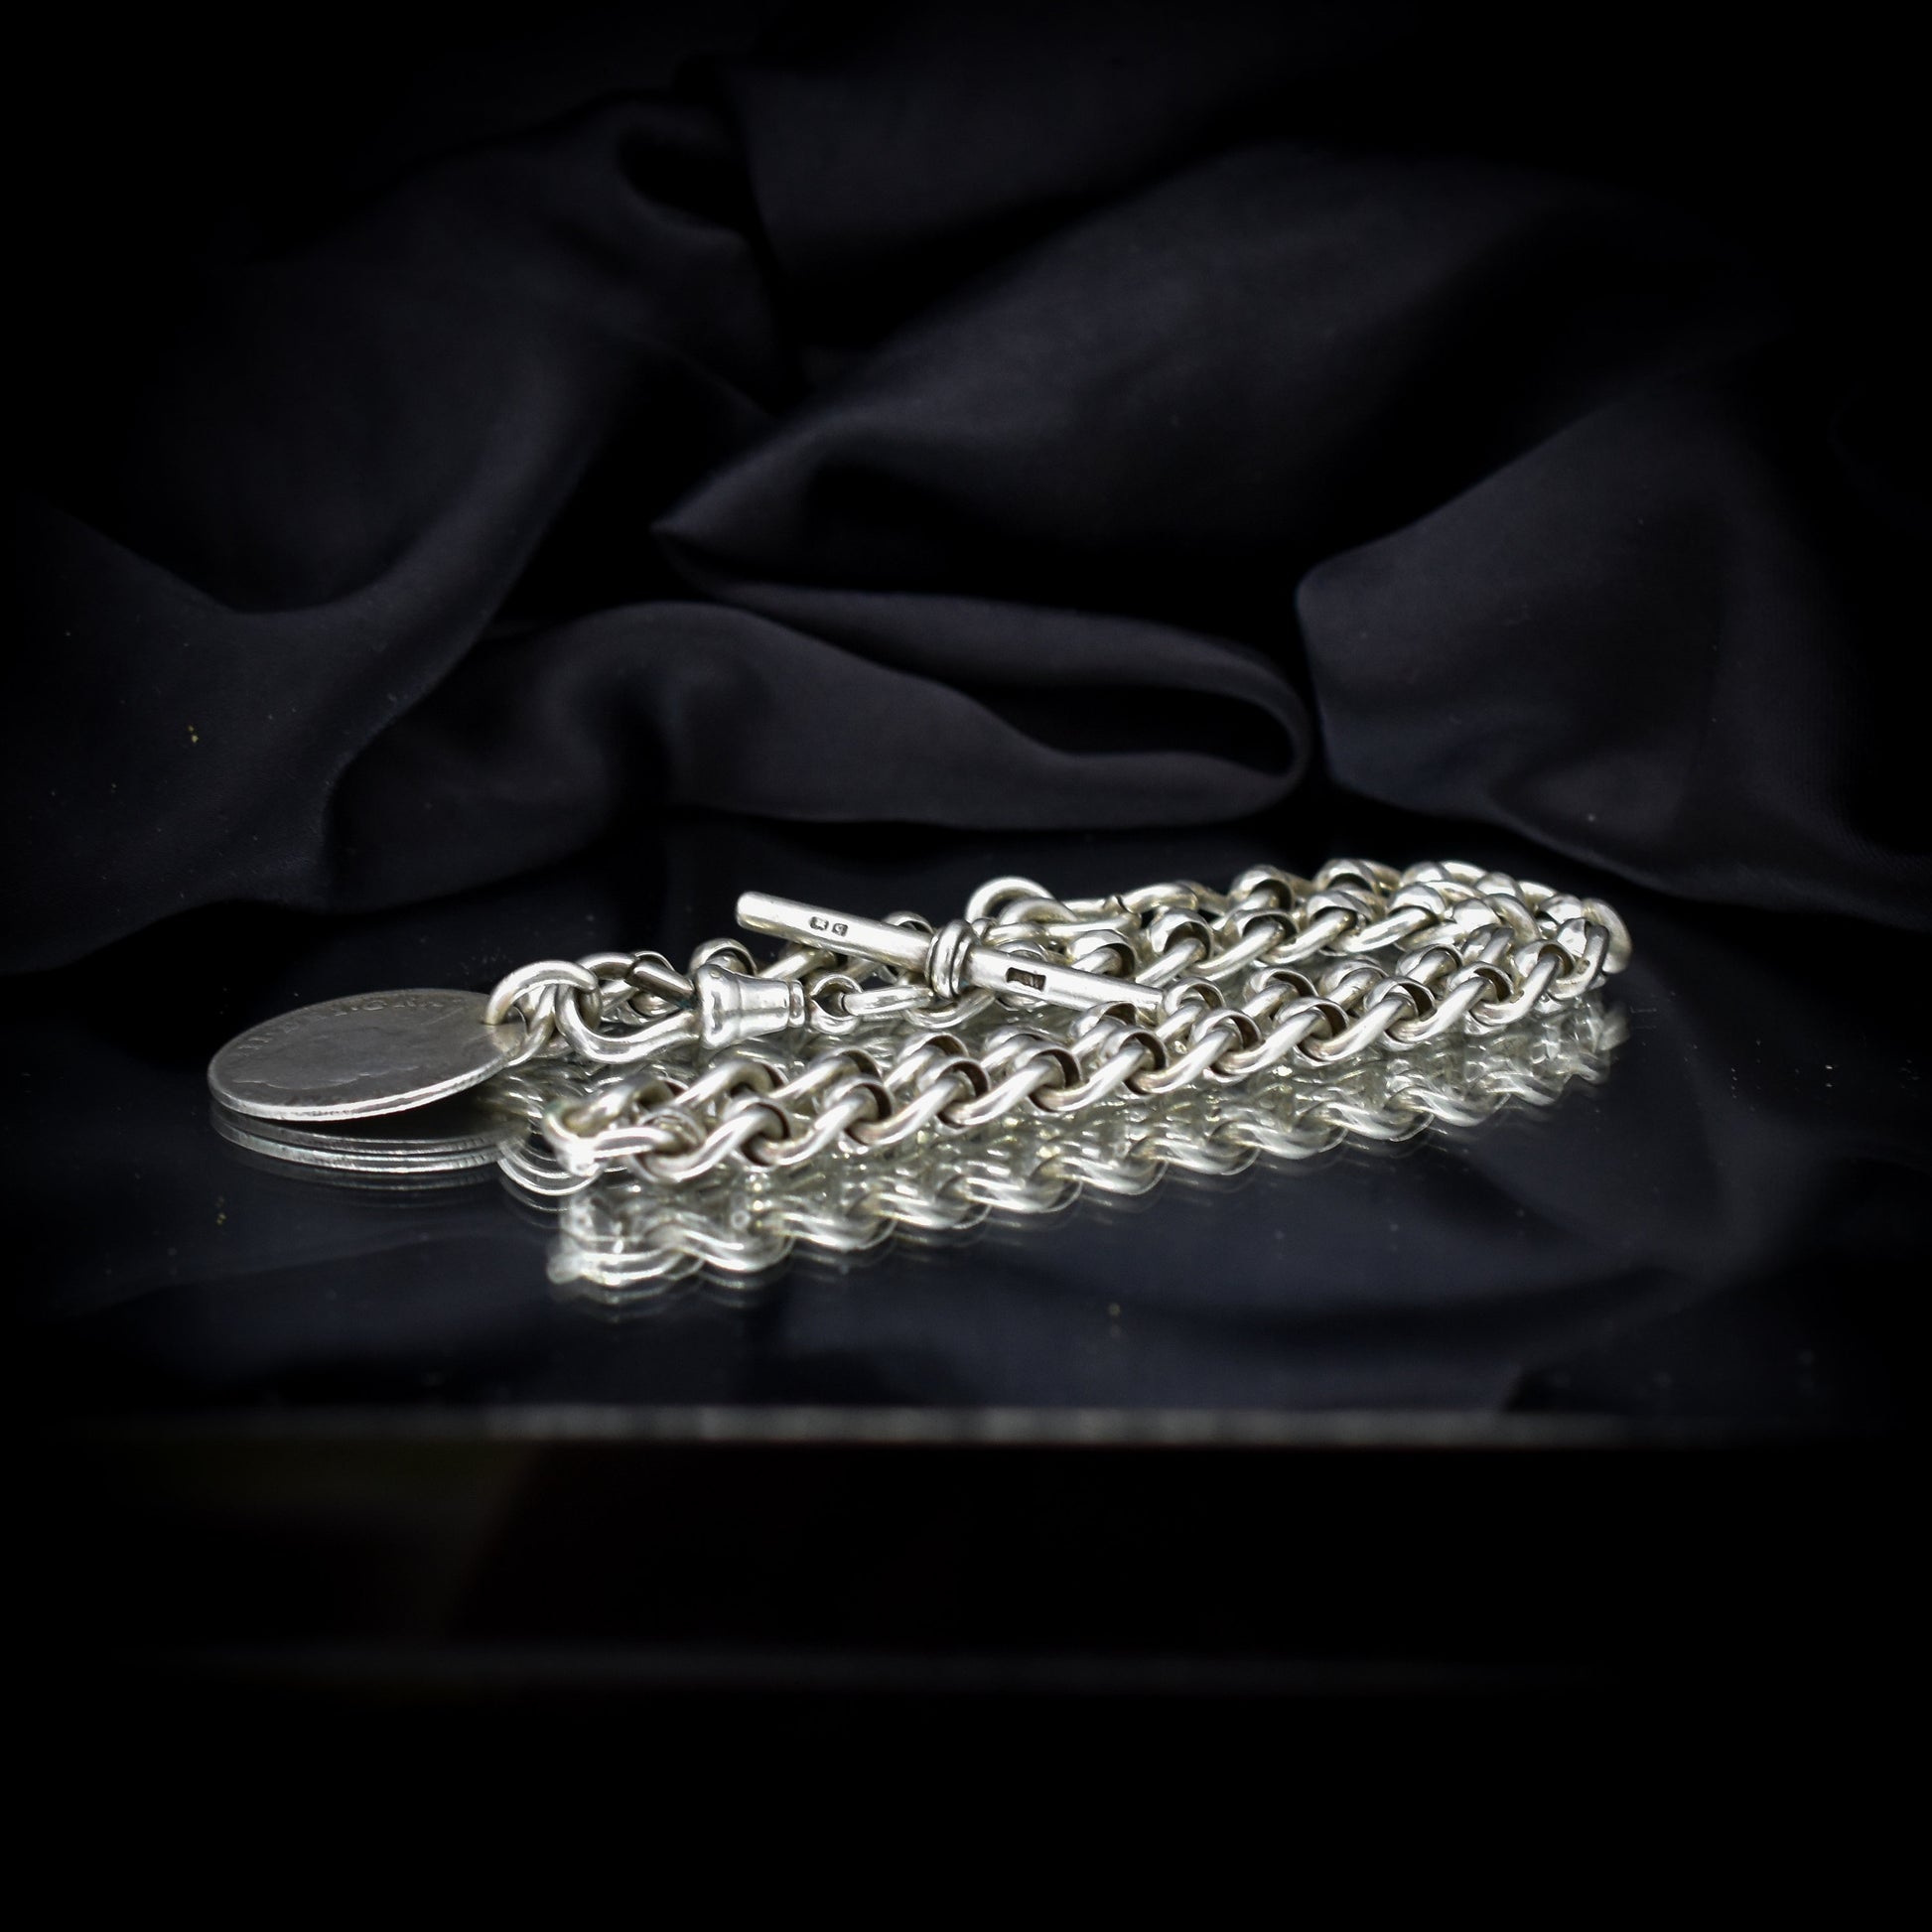 Antique Sterling Silver Rollerball Watch Chain Necklace | Birmingham 1890